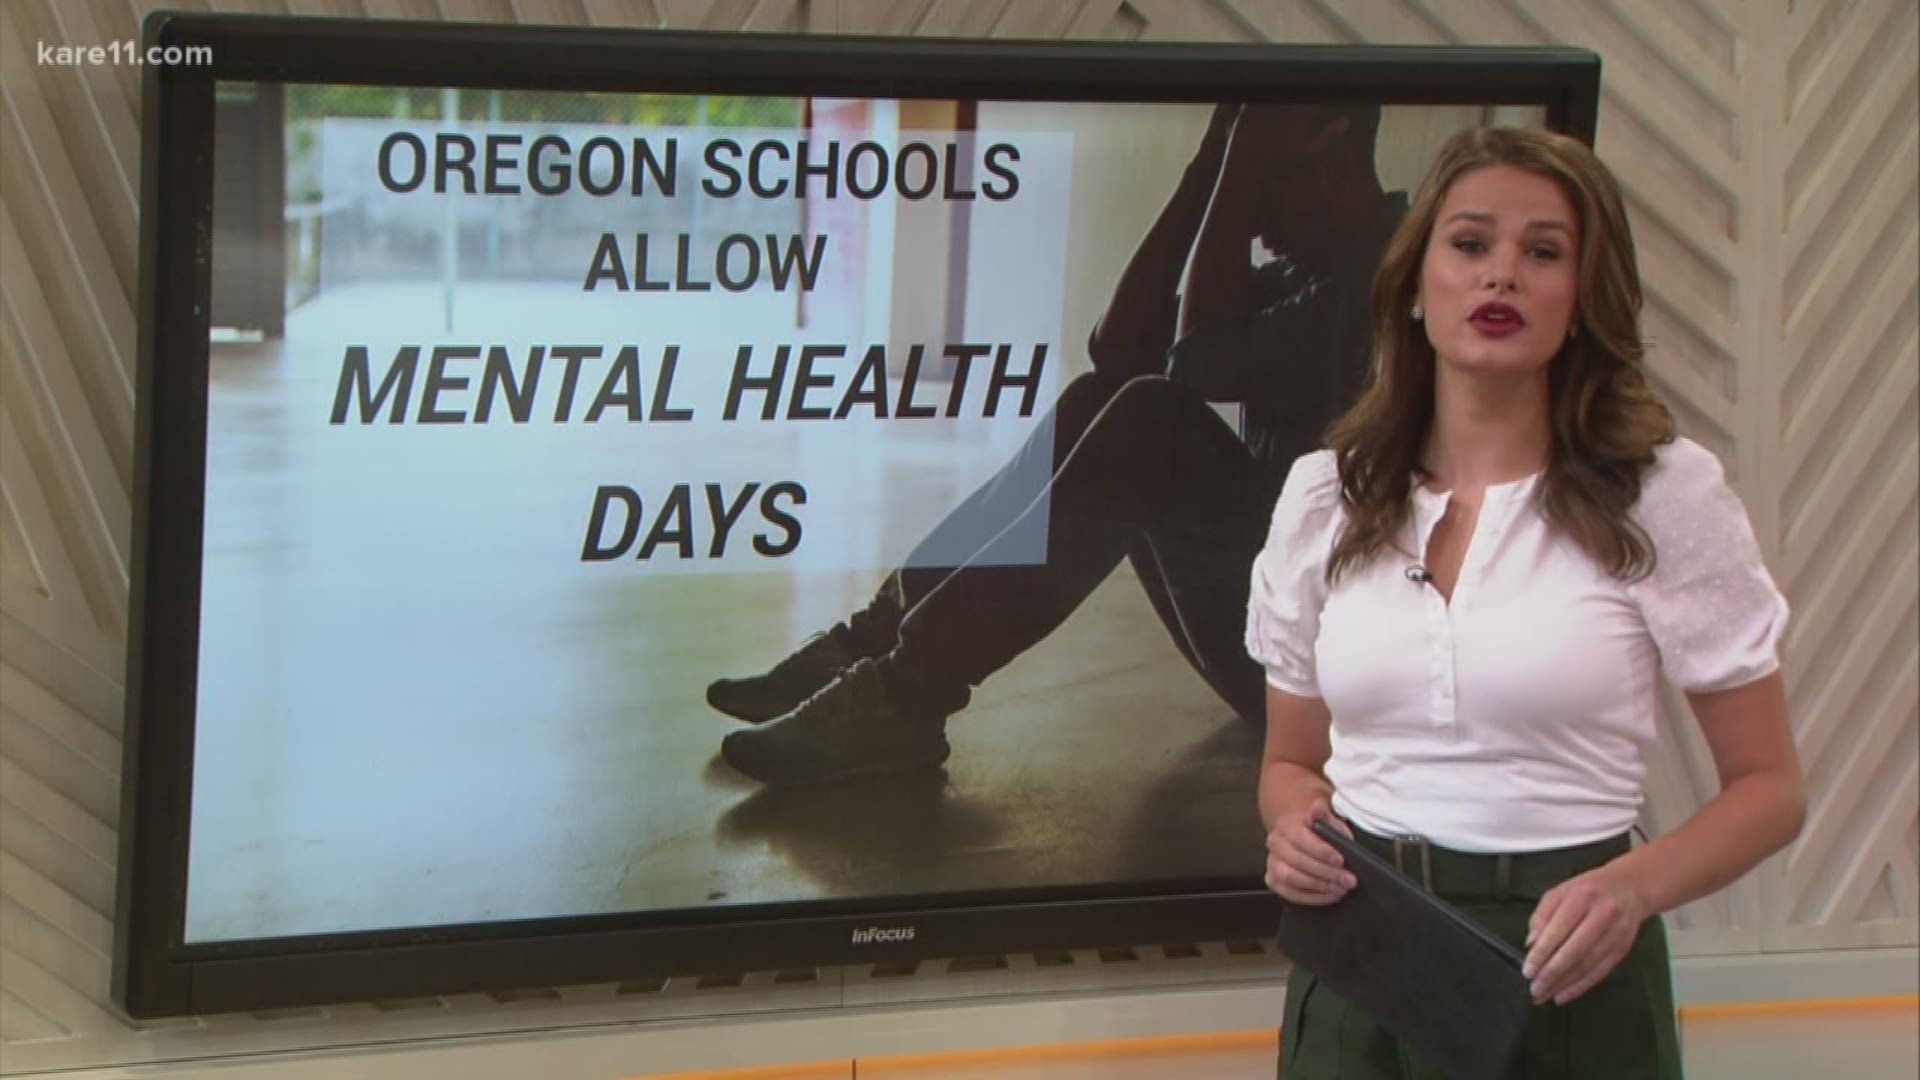 A new law will allow high school students in Oregon to take mental health days, just like they would sick days, to change the stigma around mental health. https://kare11.tv/32Iixqk